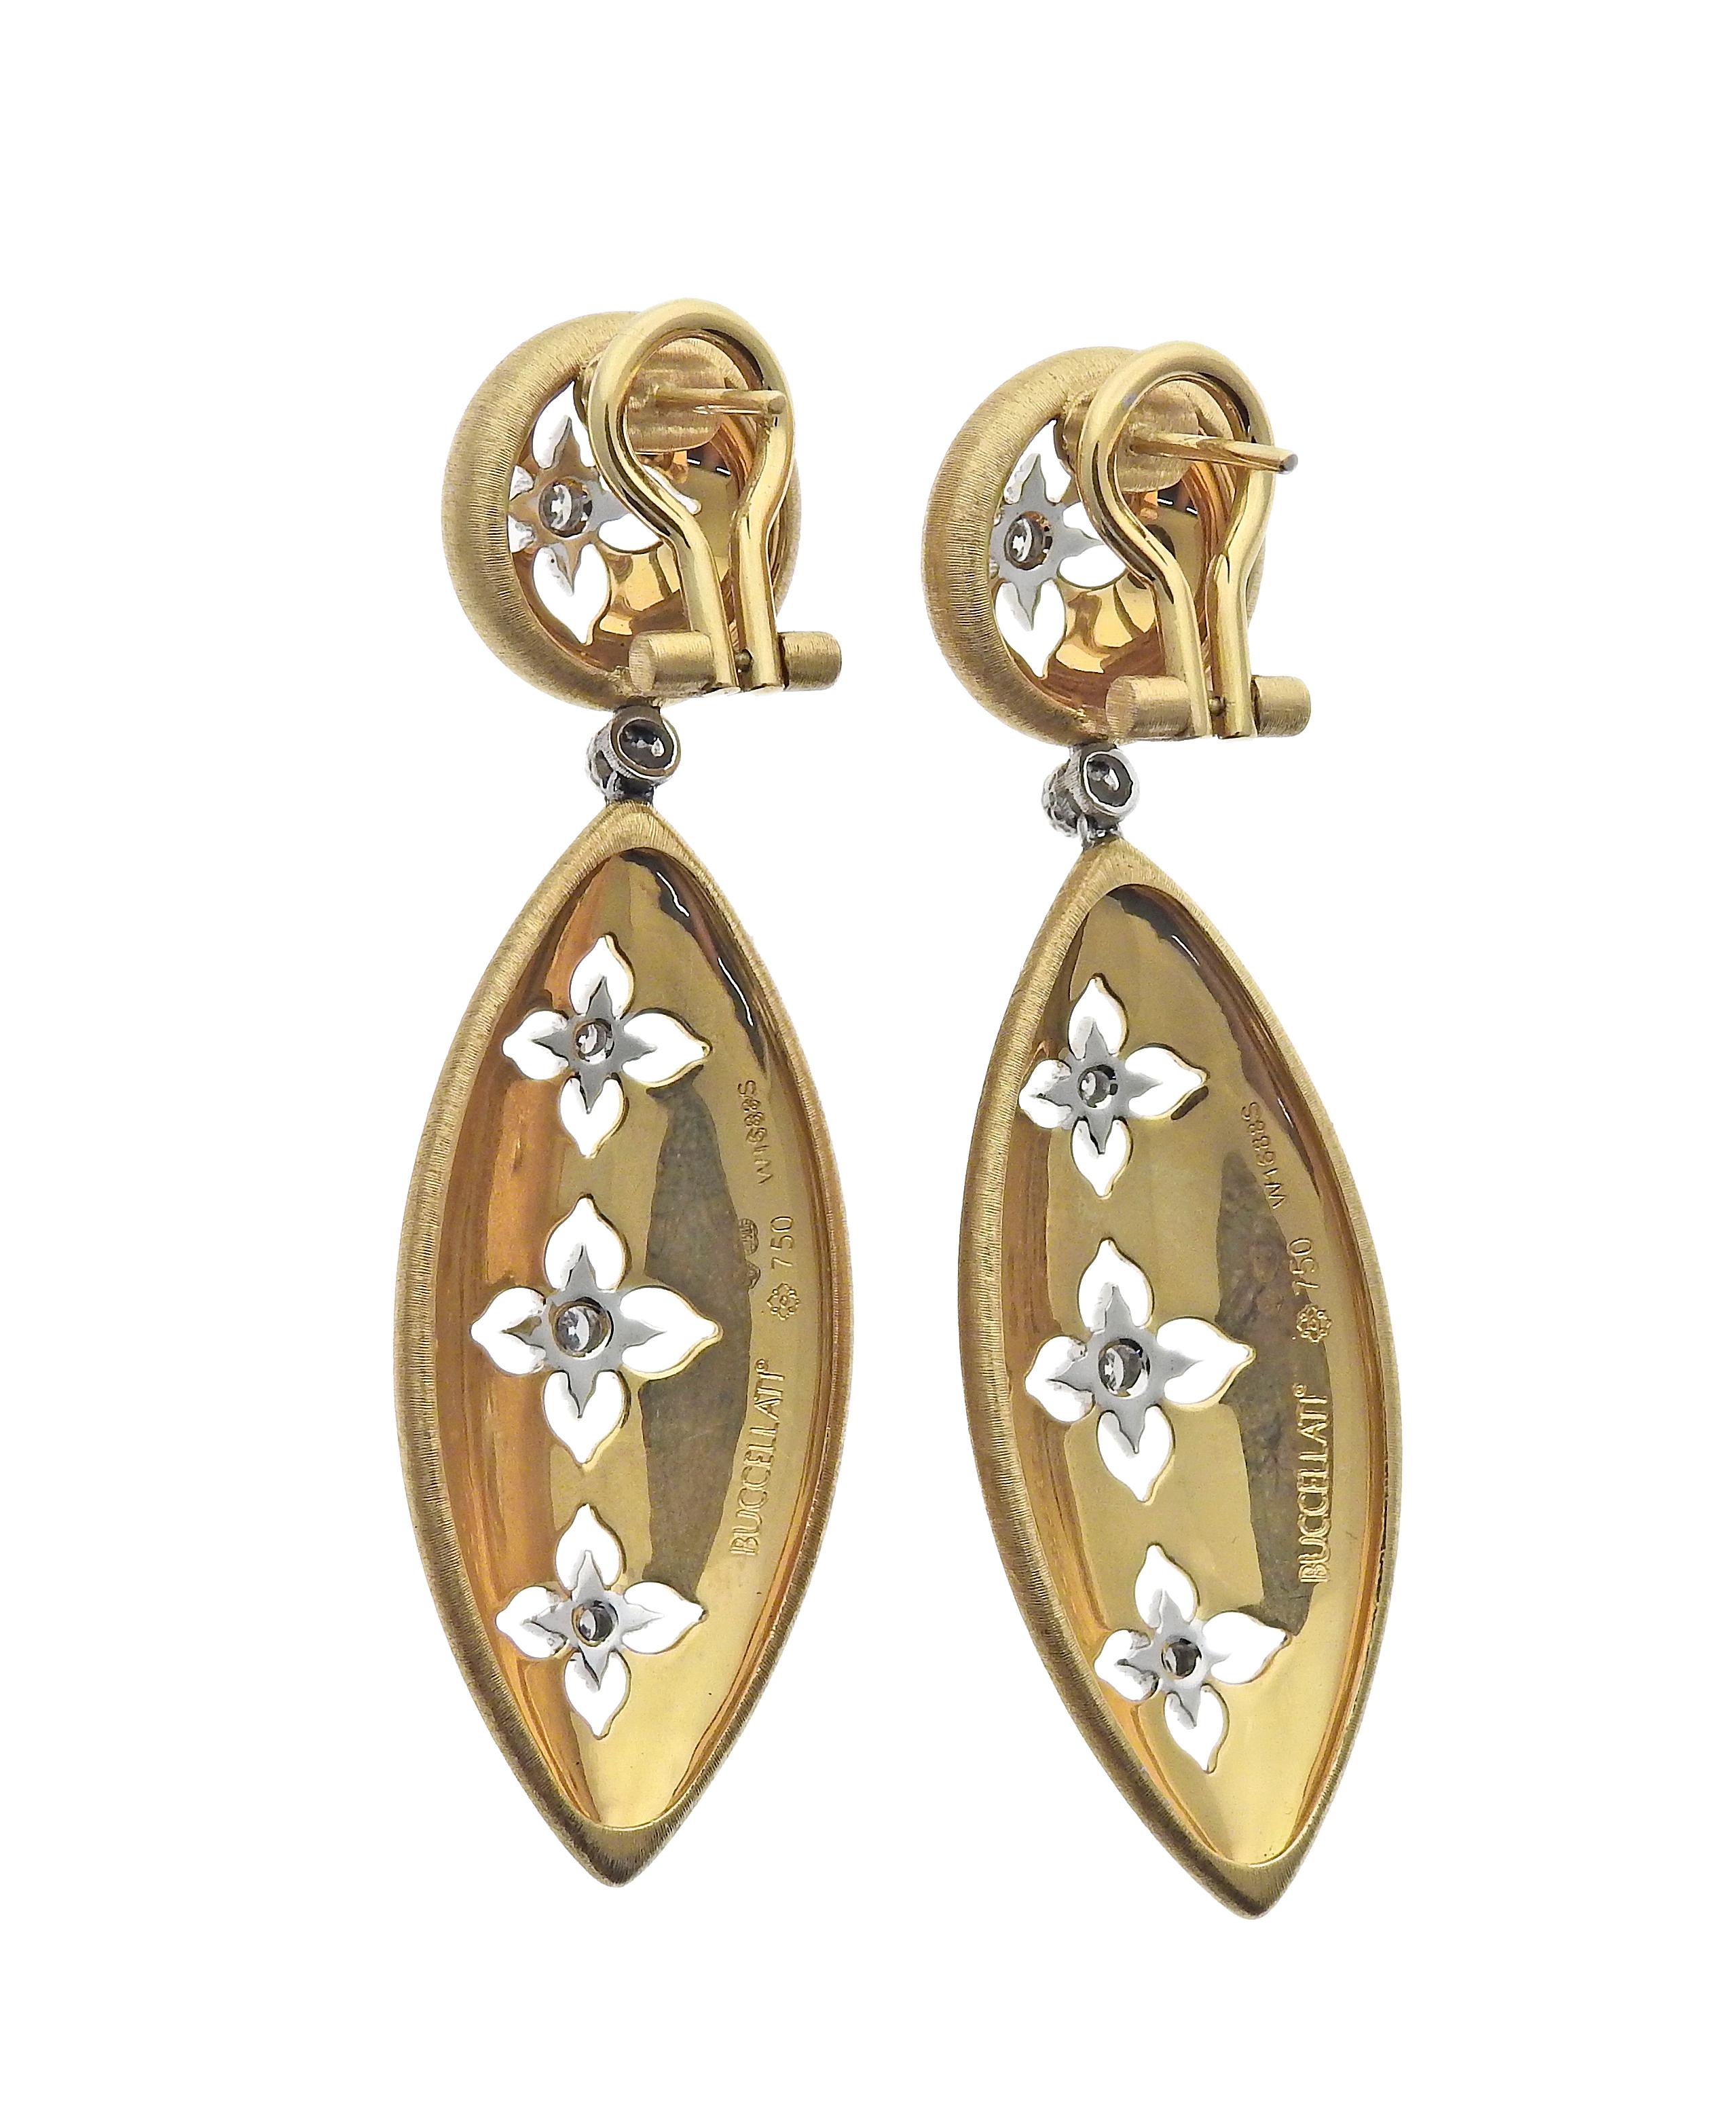 Buccellati yellow and white gold Macri Giglio drop earrings feature 0.25ctw in VS/FG diamonds. Earrings are 55mm long and 17mm at the widest point, top button is 13mm in diameter. Marked: Buccellati Italian marks, Au 750, W 1688S. Weight is 20.4